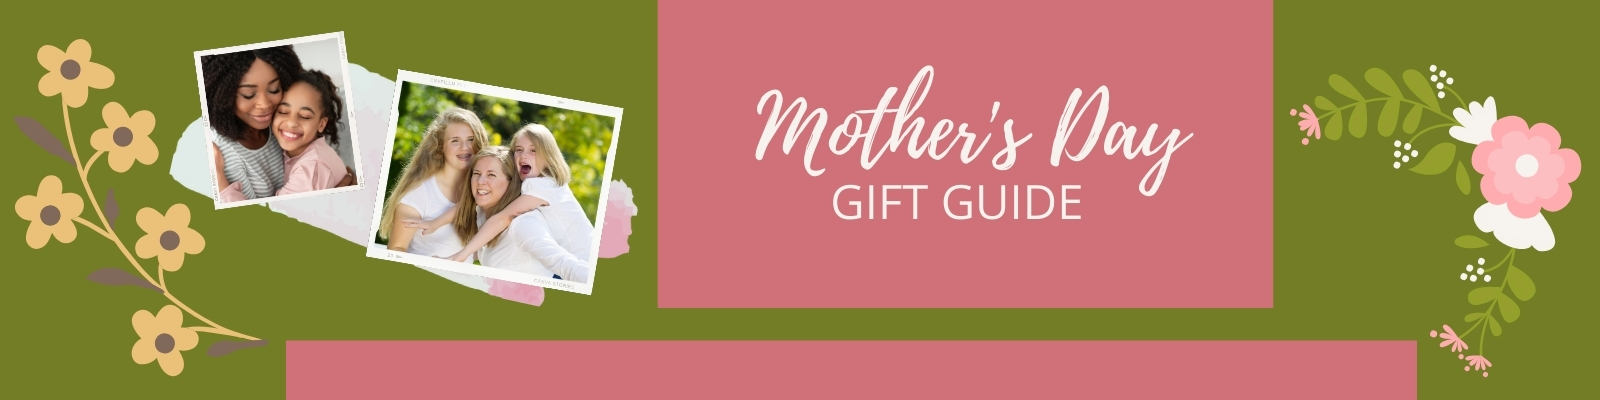 Mother's Day Gift Guide Header